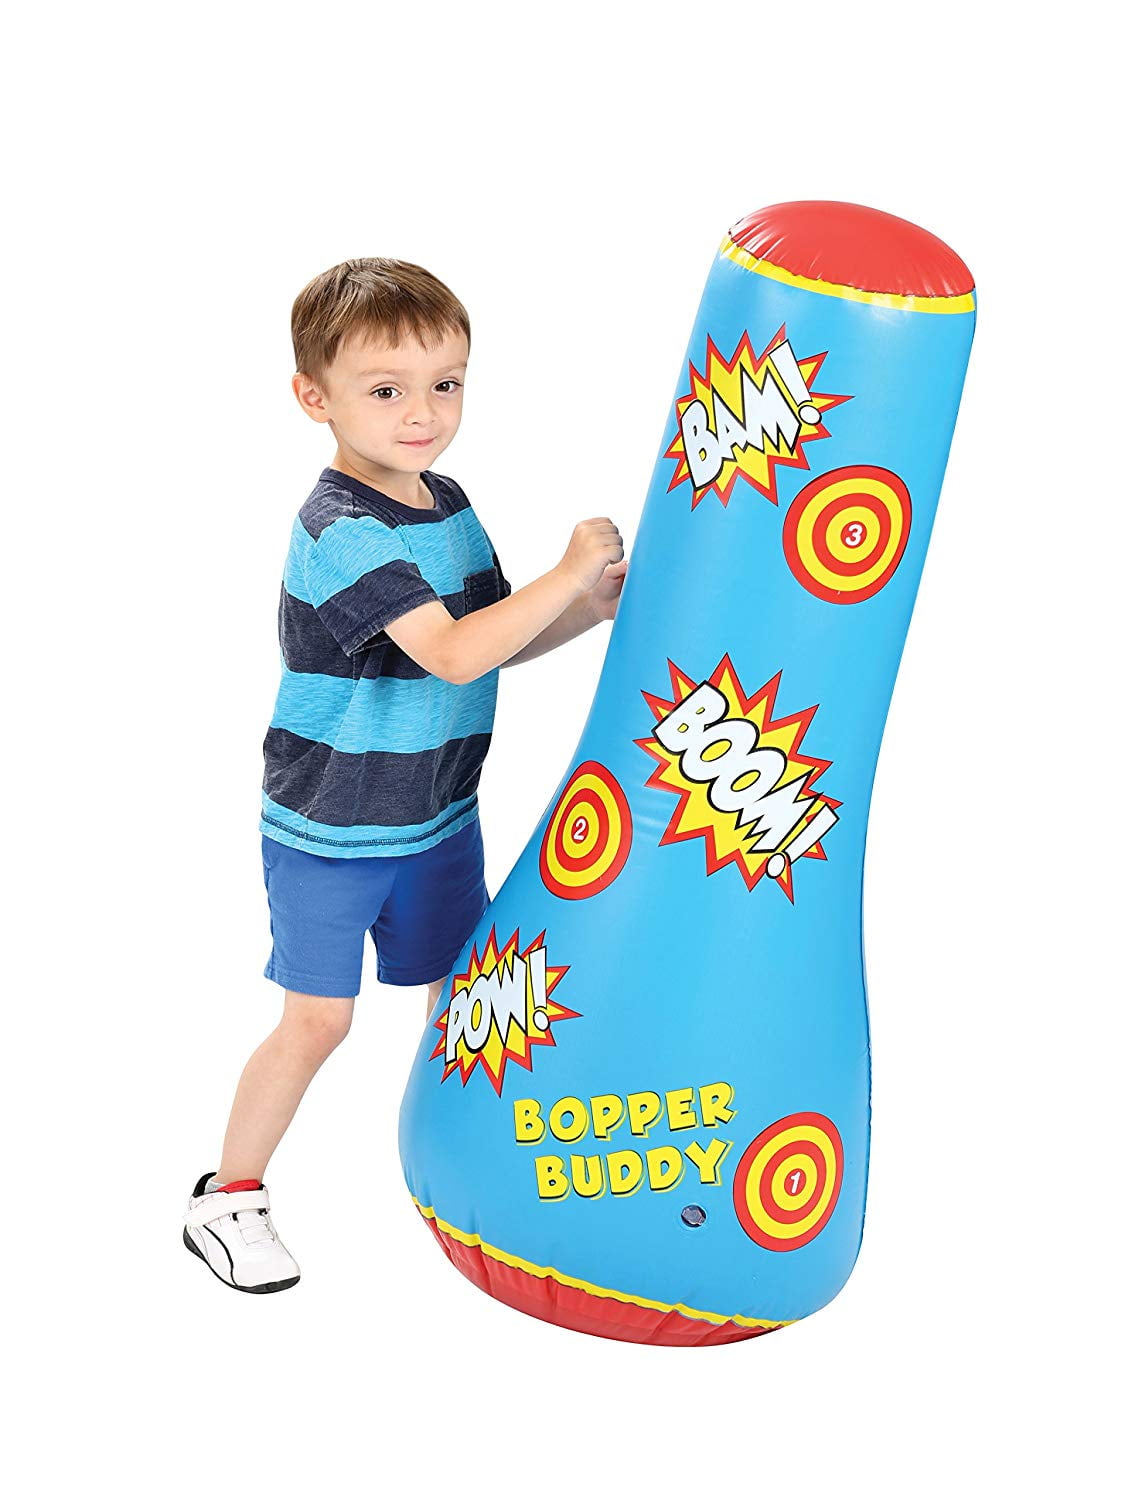 INFLATABLE PUNCHING BAG FOR KIDS BOYS CHILDREN BOXING TOY EXERCISE STRESS RELIEF 